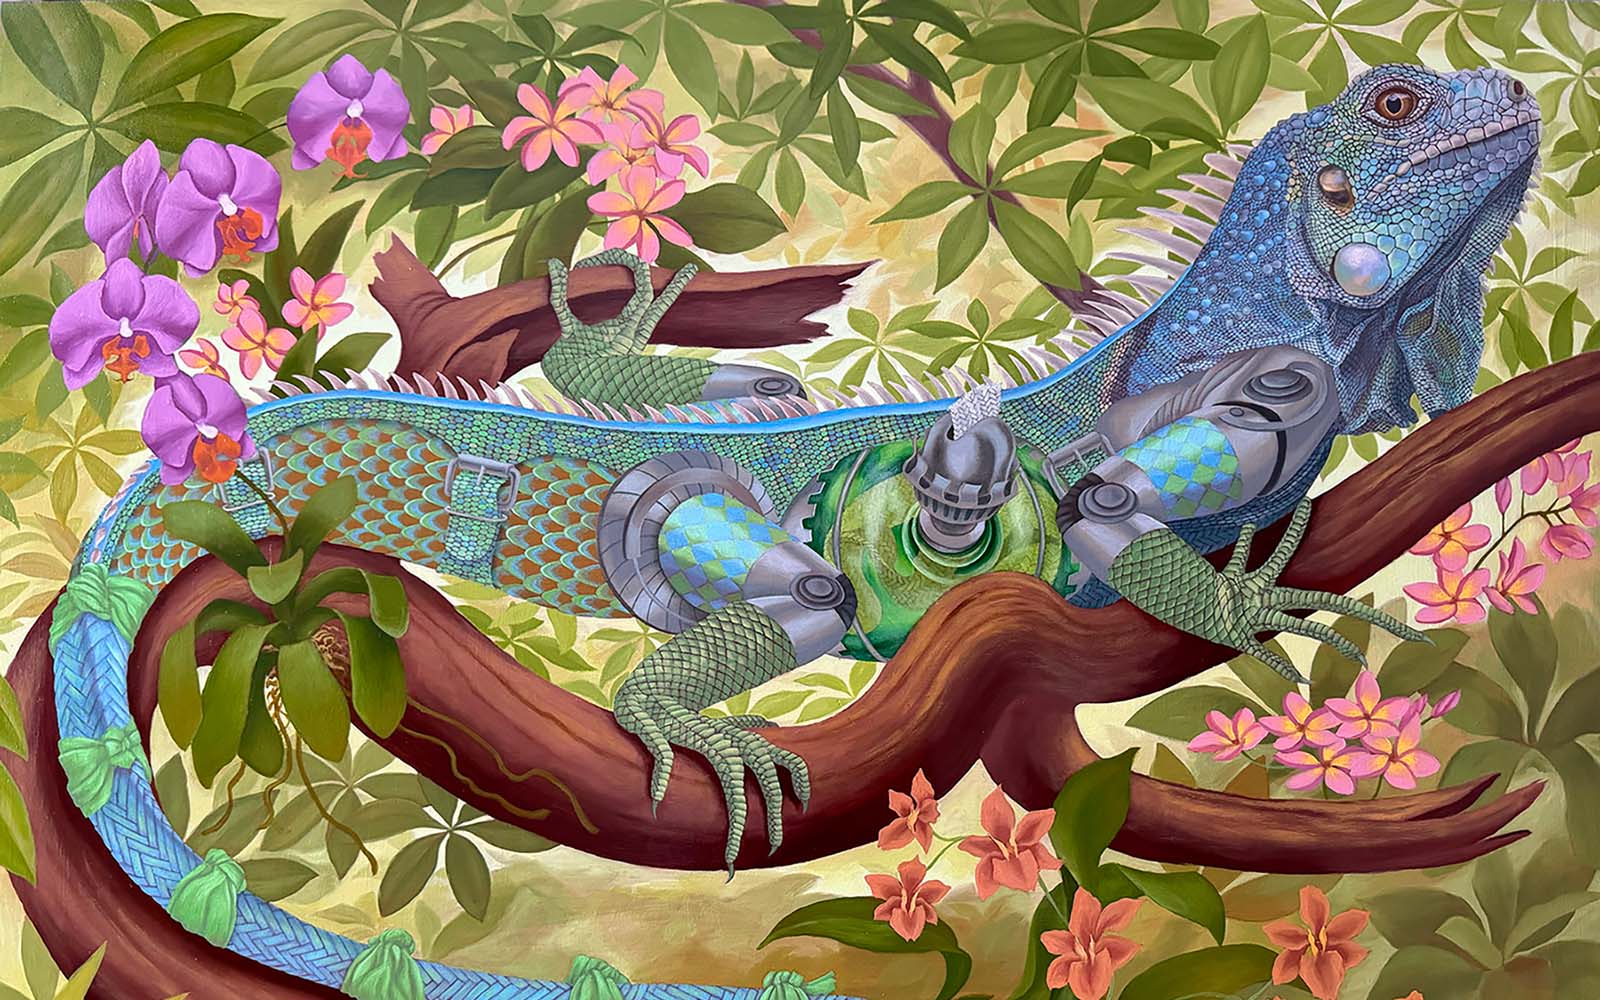 Painting of a brightly colored iguana in foliage by Heidi Taillefer